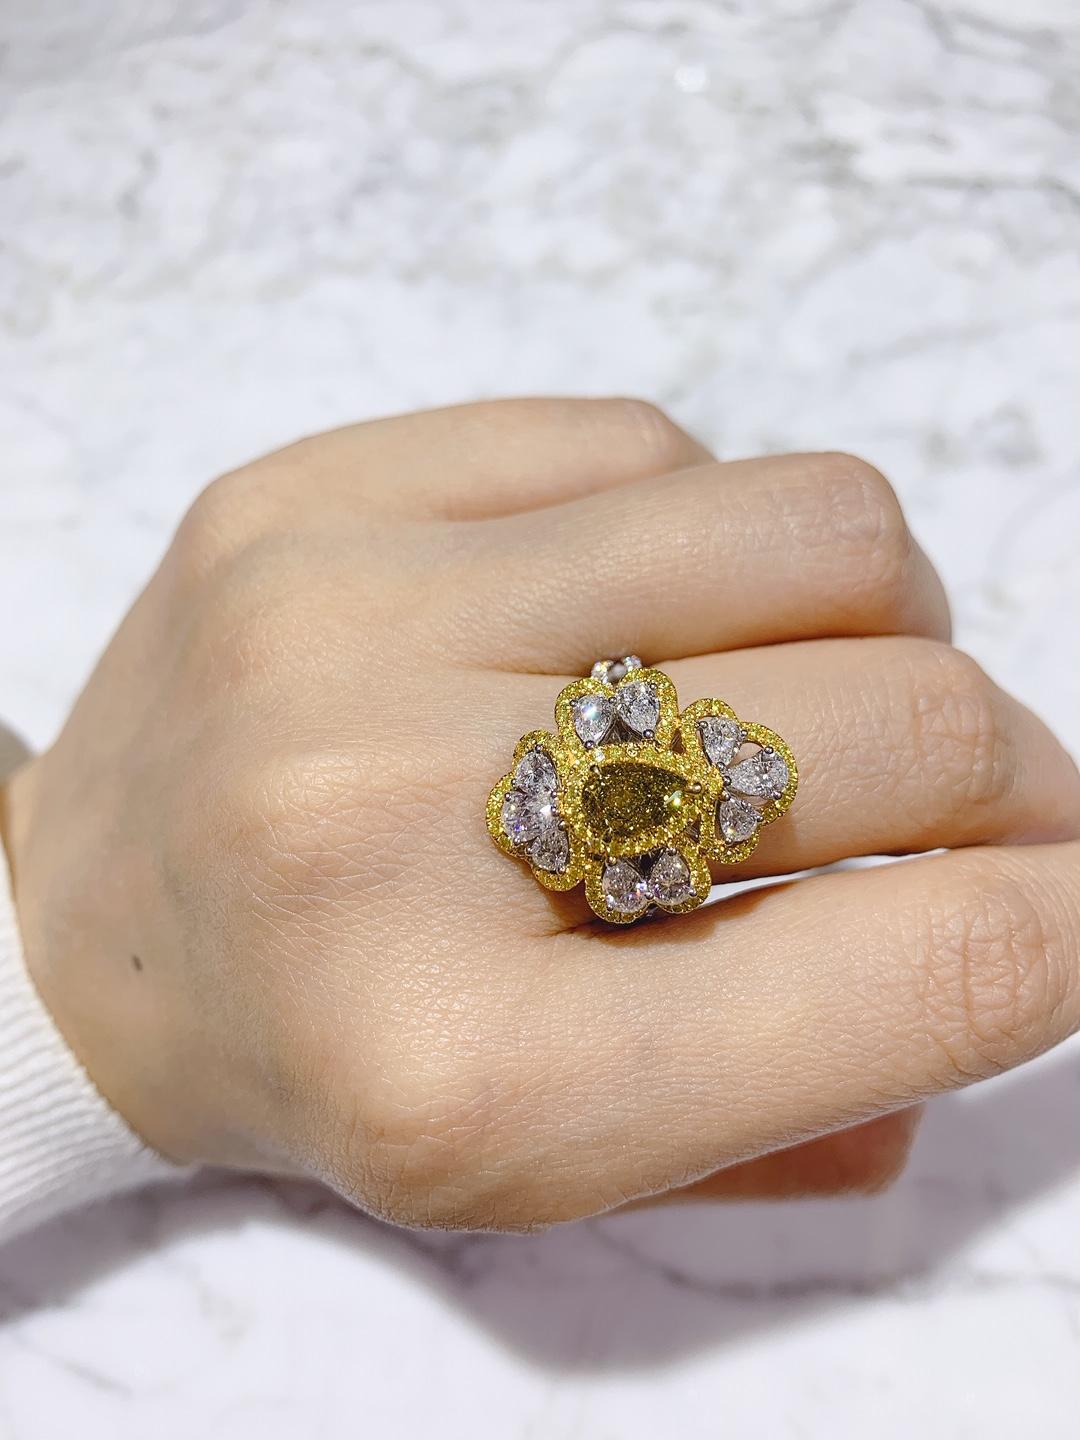 Contemporary GIA Certified 1.03 Carat Fancy Deep Brownish Greenish Yellow Diamond Ring For Sale